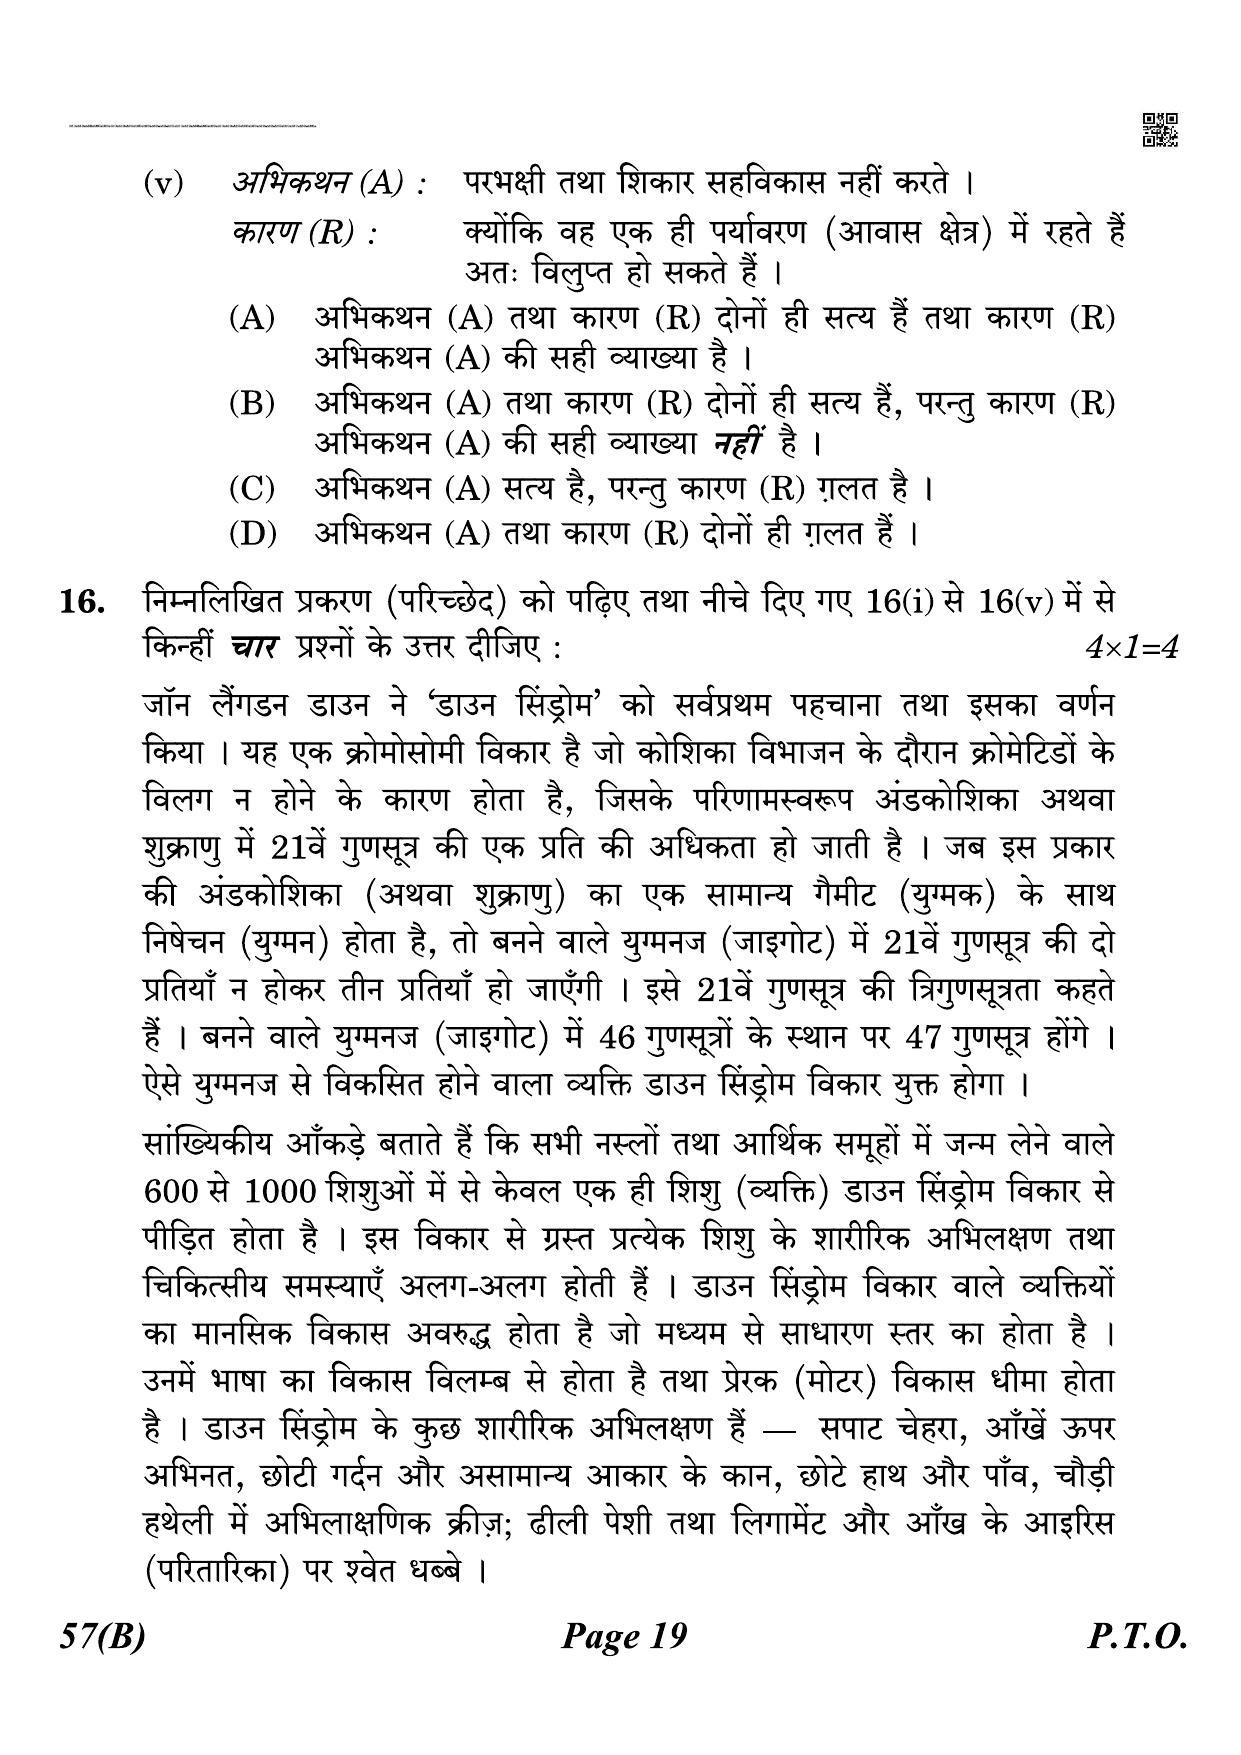 CBSE Class 12 QP_044_biology_for_visually_impared_candidates 2021 Compartment Question Paper - Page 19